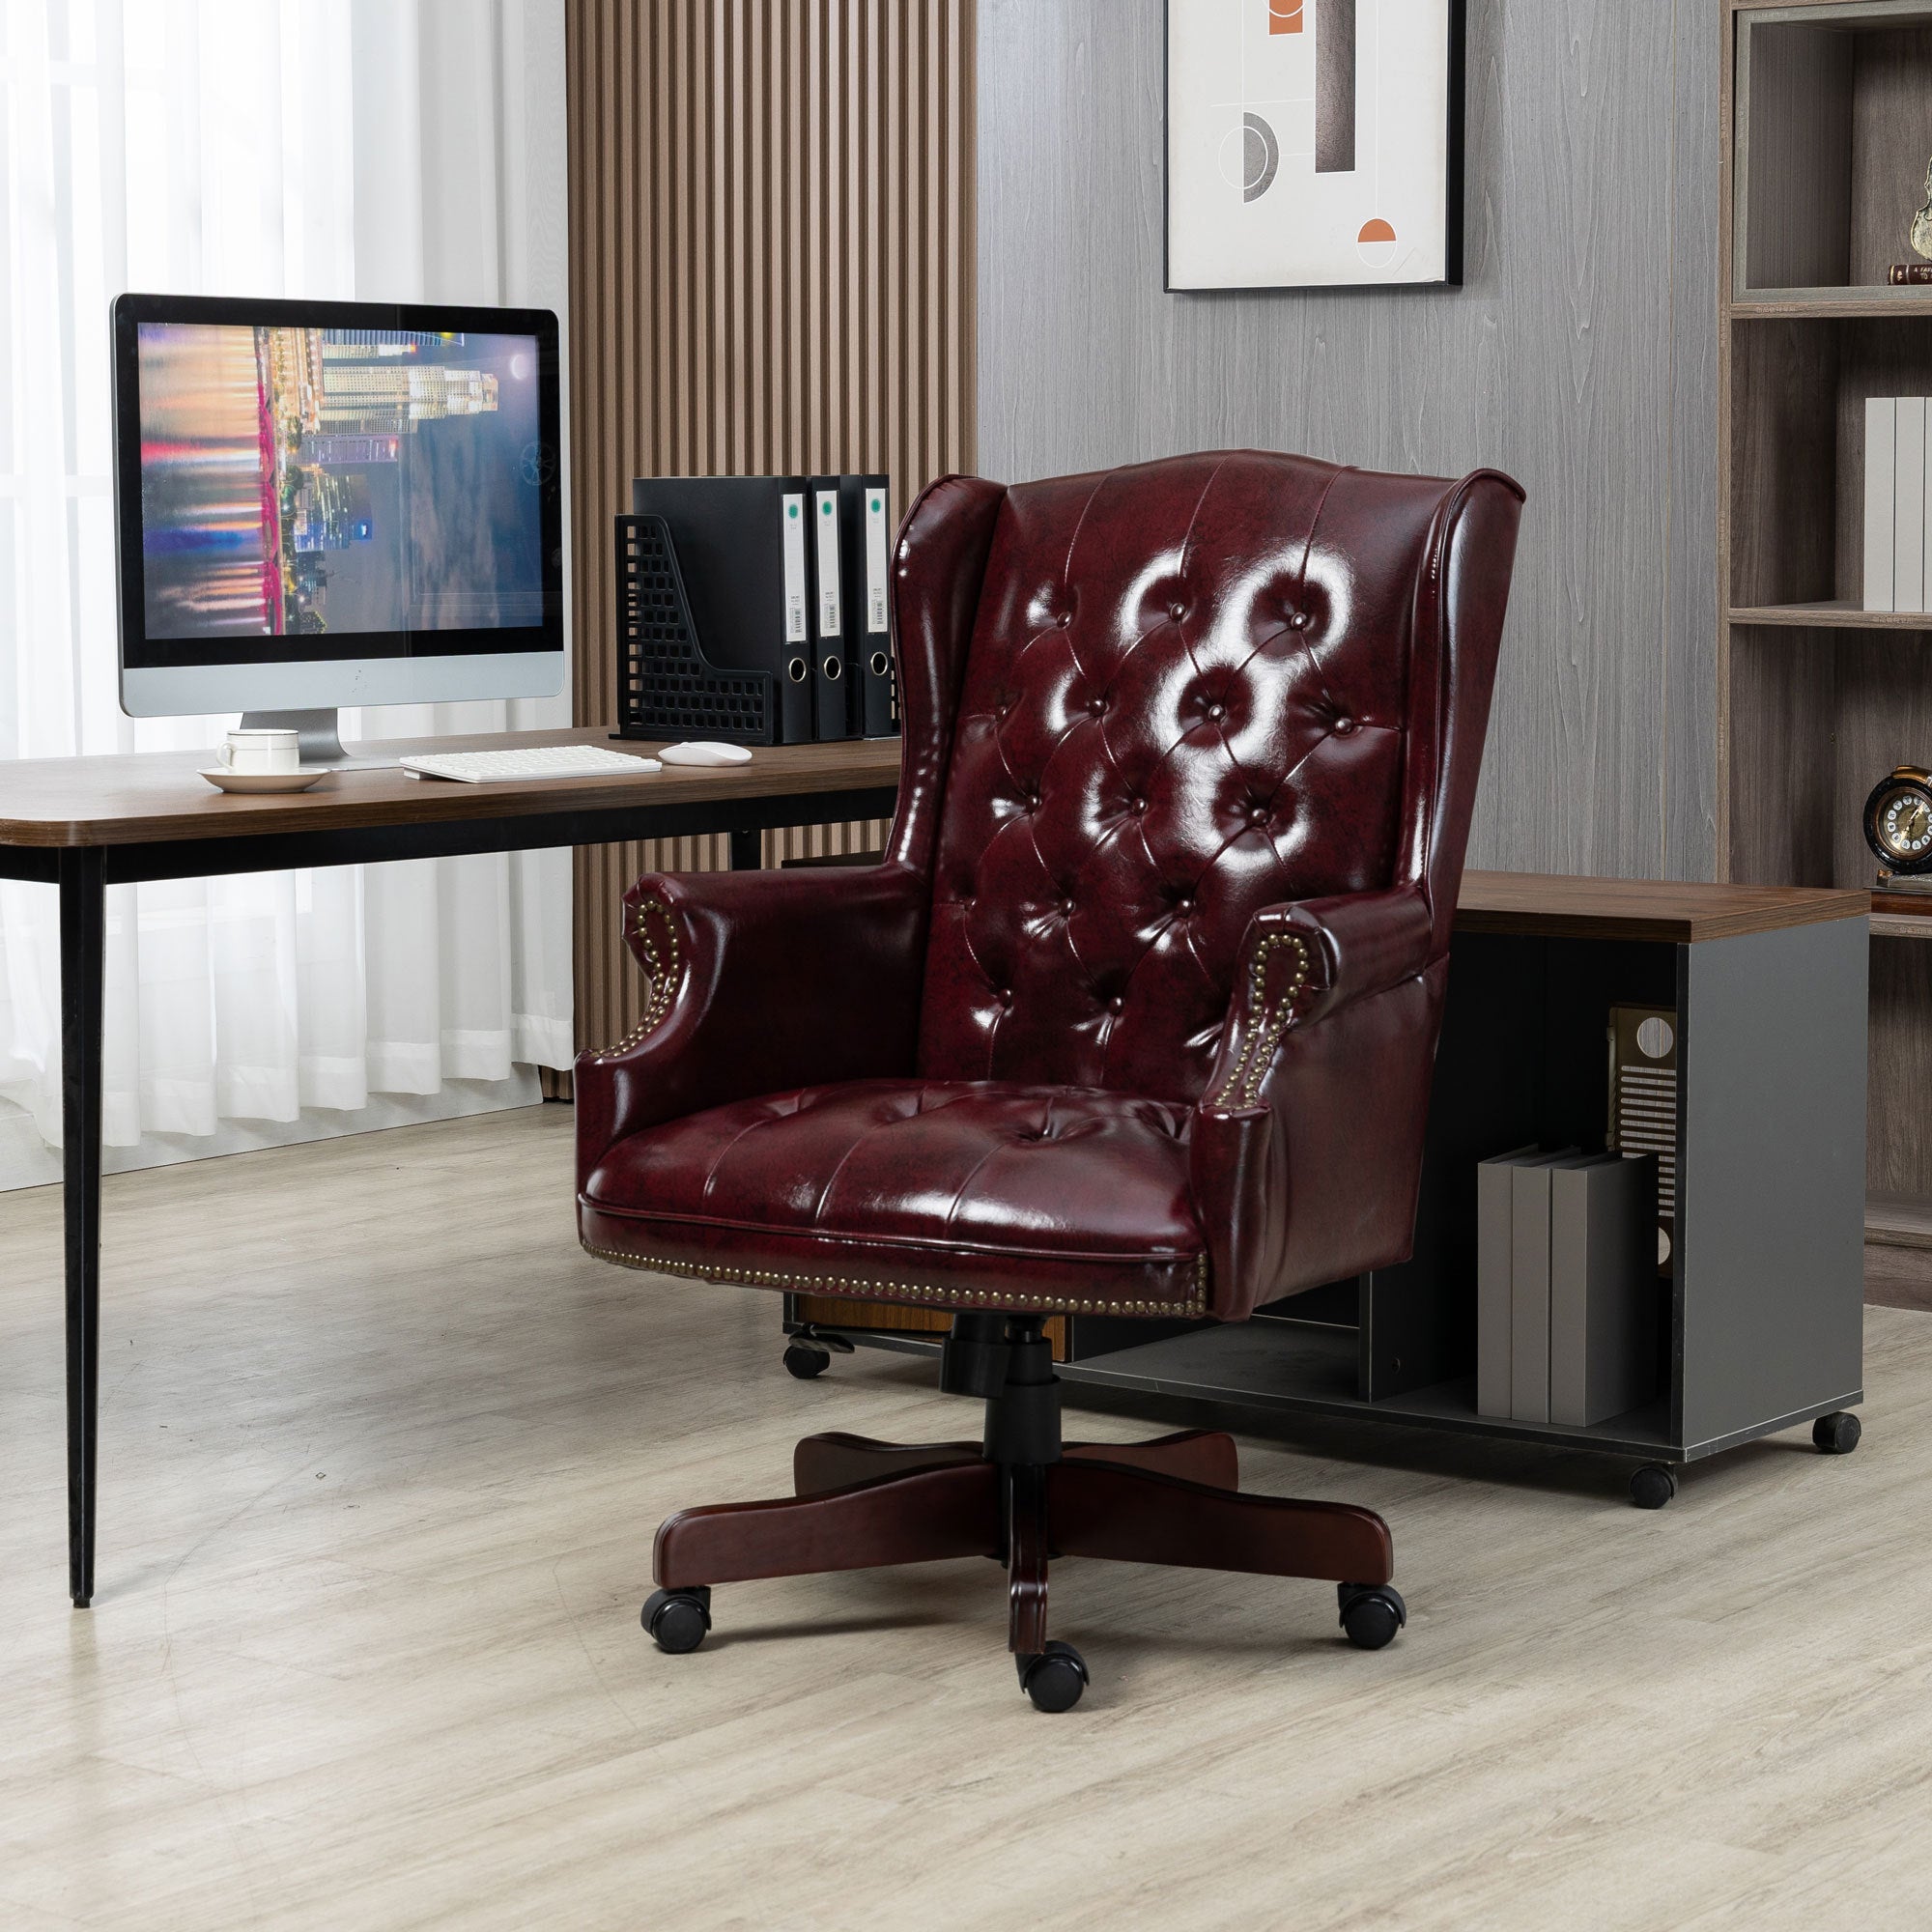 🆓🚛 Executive Office Chair - High Back Reclining Comfortable Desk Chair - Ergonomic Design - Thick Padded Seat and Backrest - Pu Leather Desk Chair With Smooth Glide Caster Wheels, Burgundy